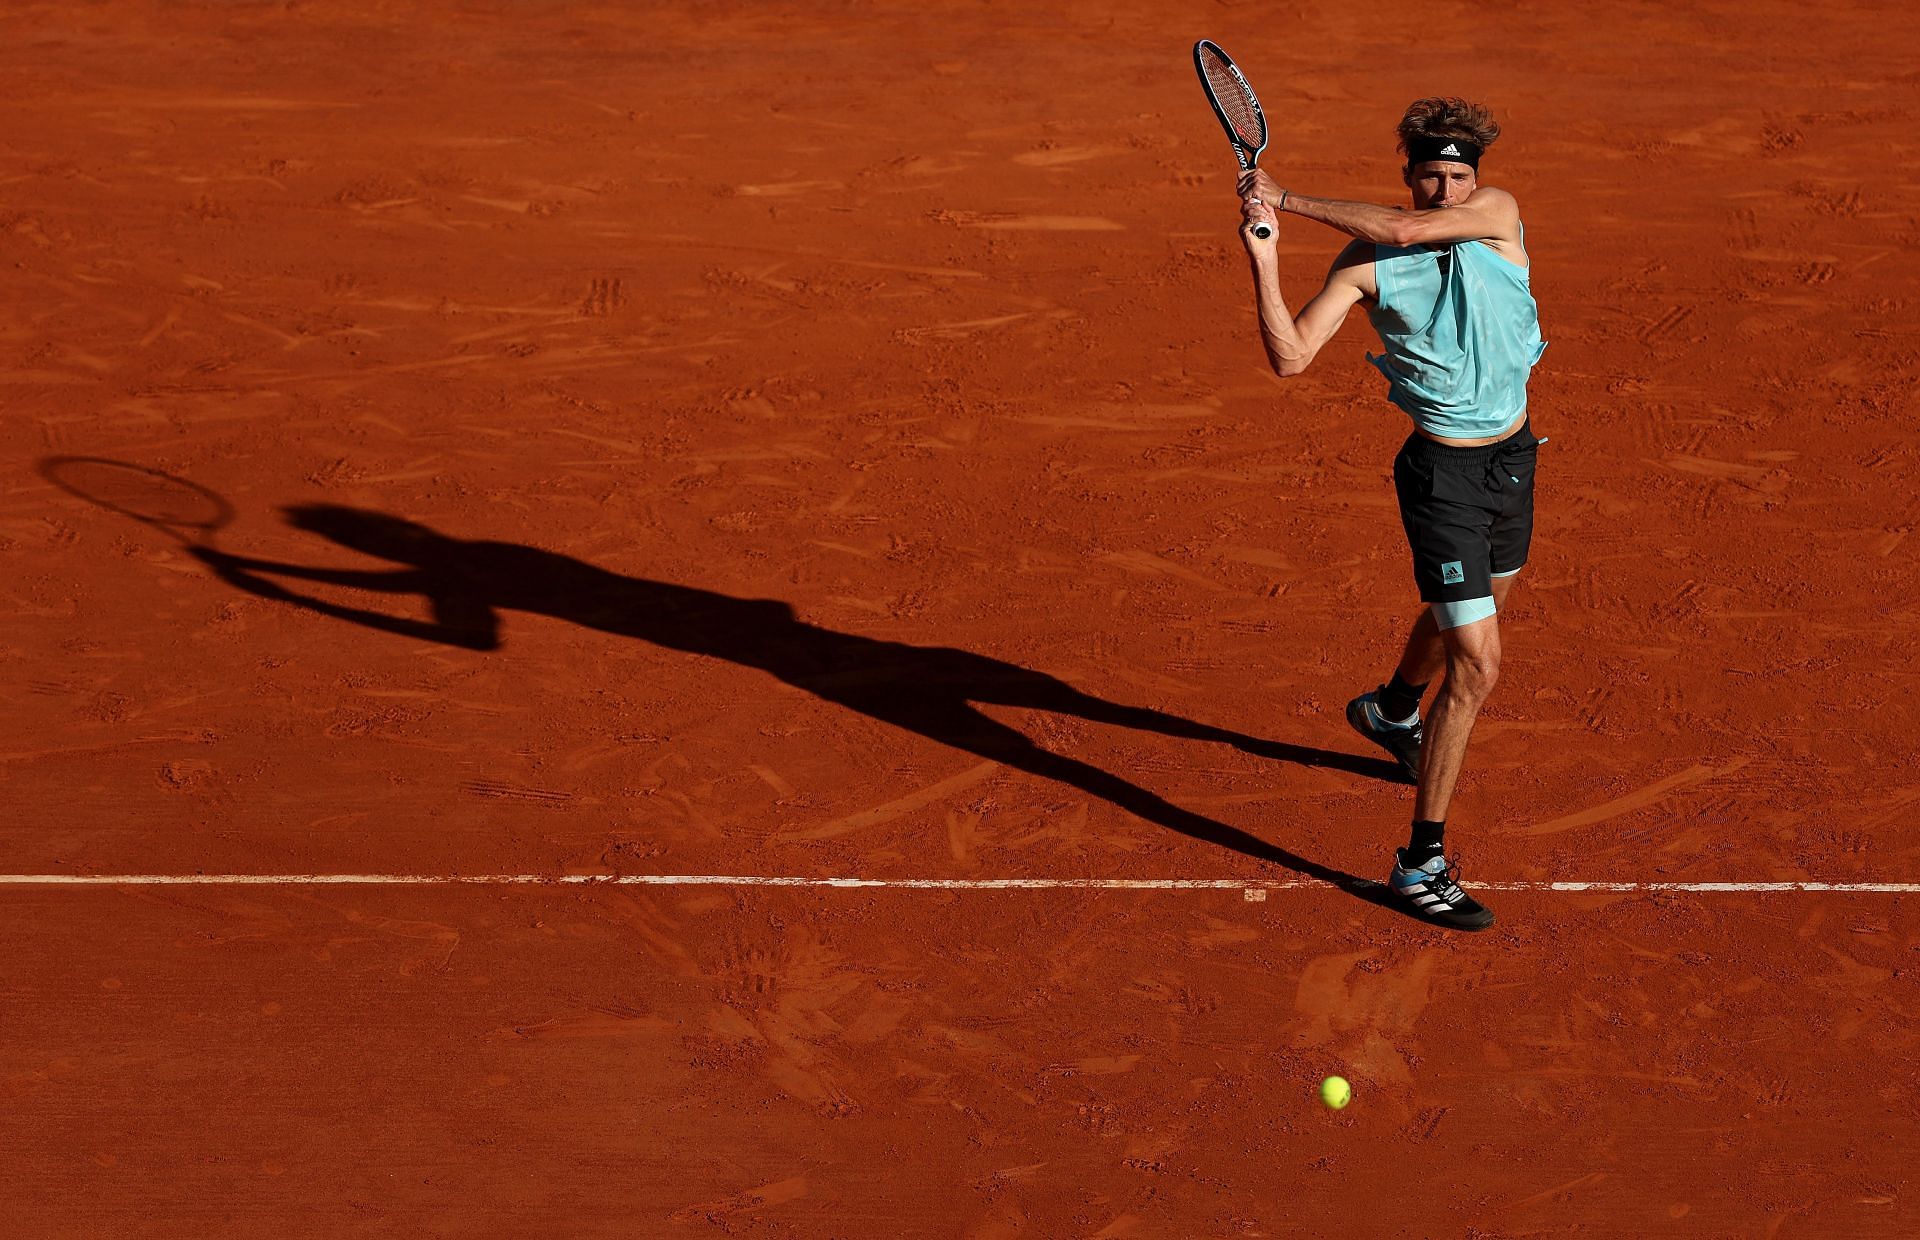 Alexander Zverev will look to make his first Masters 1000 final of 2022